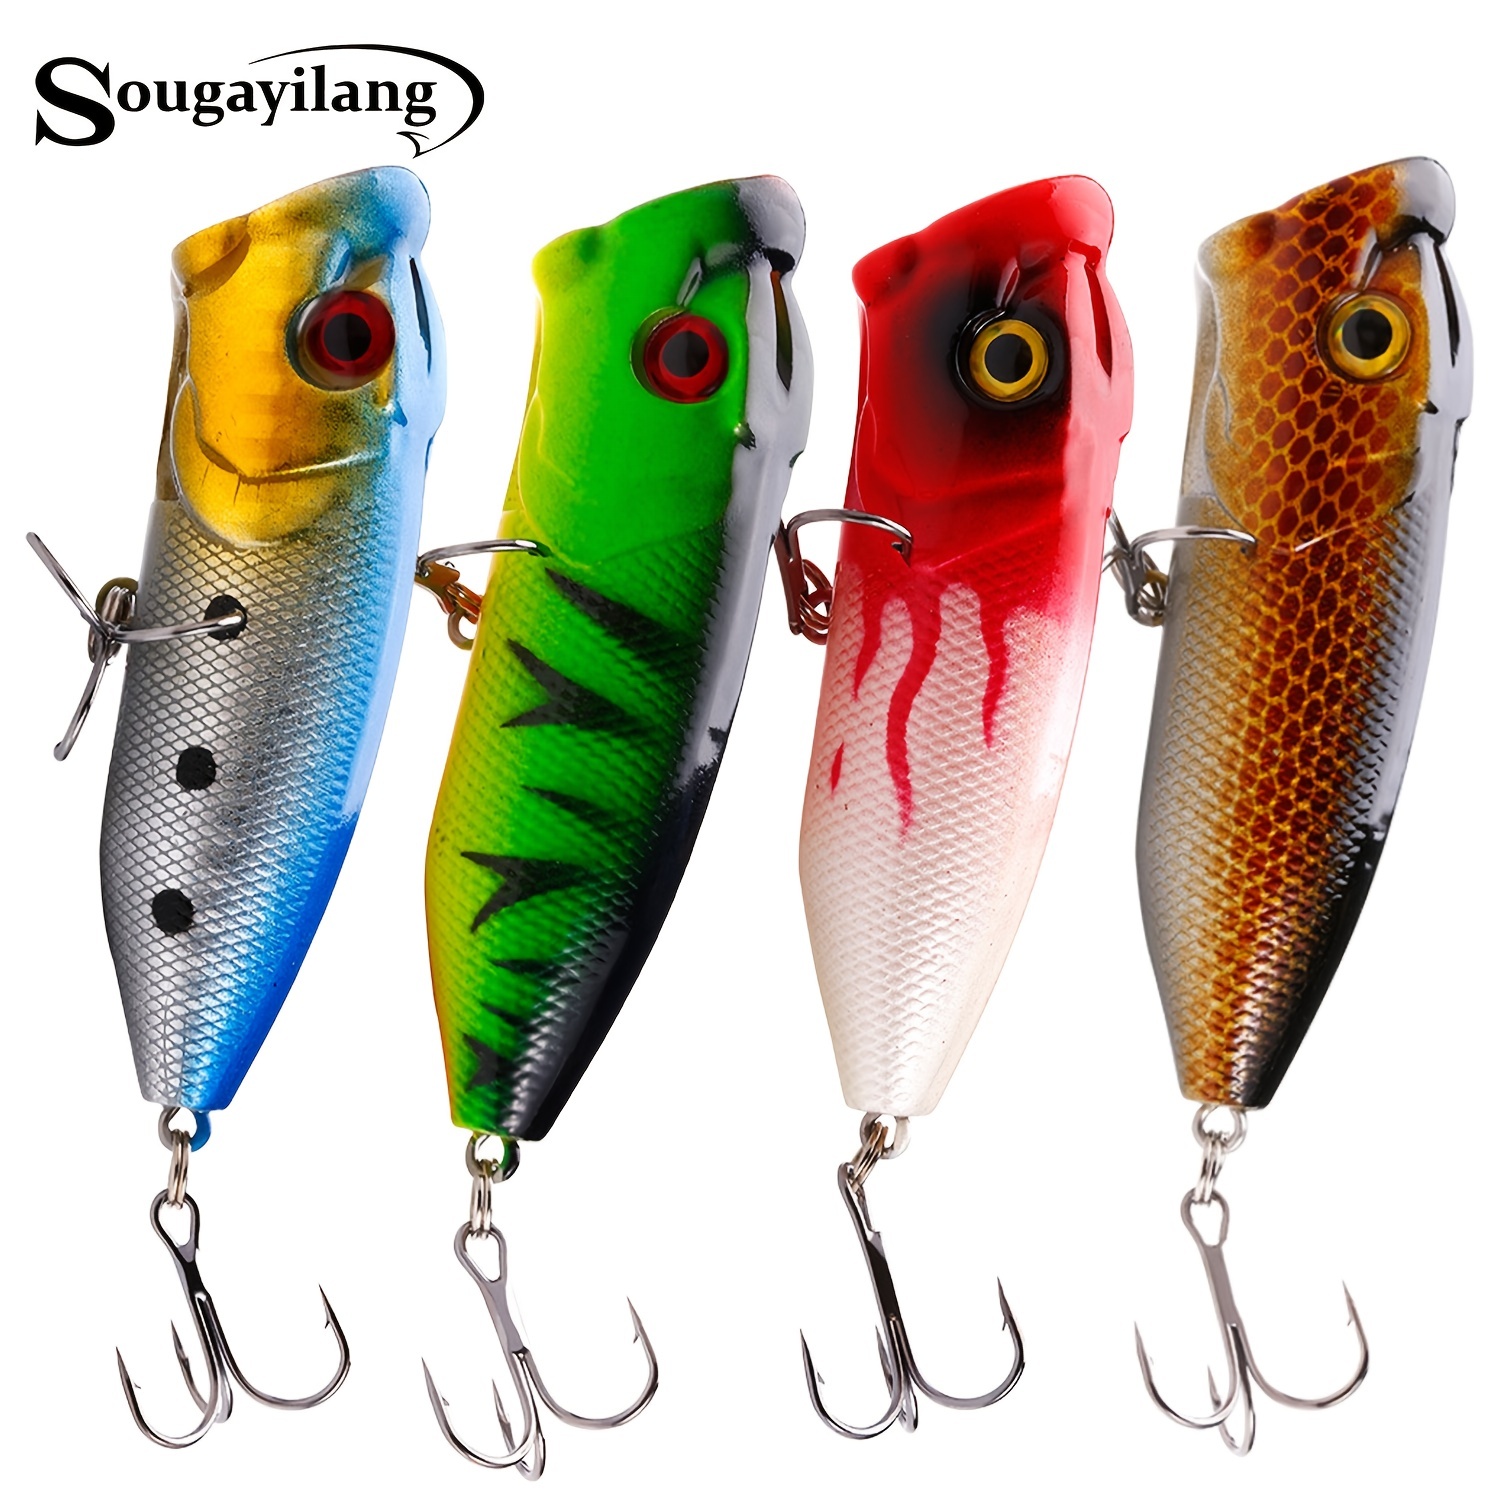 Sougayilang Fishing Lures Buzzbait Spinnerbait Topwater Lure for